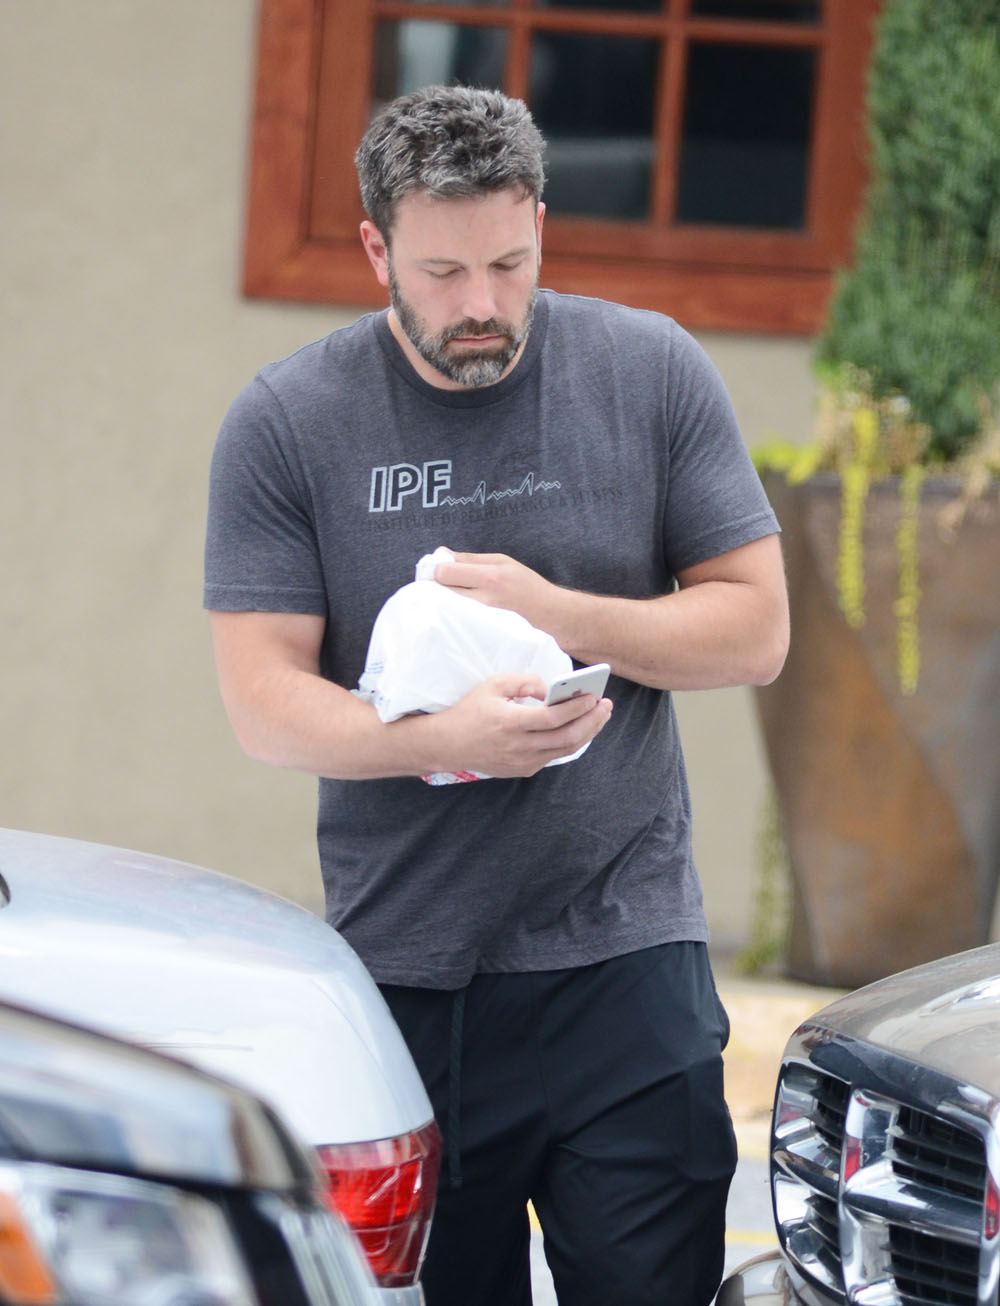 US Magazine: Ben Affleck, 42, is dating the 28 year-old nanny.